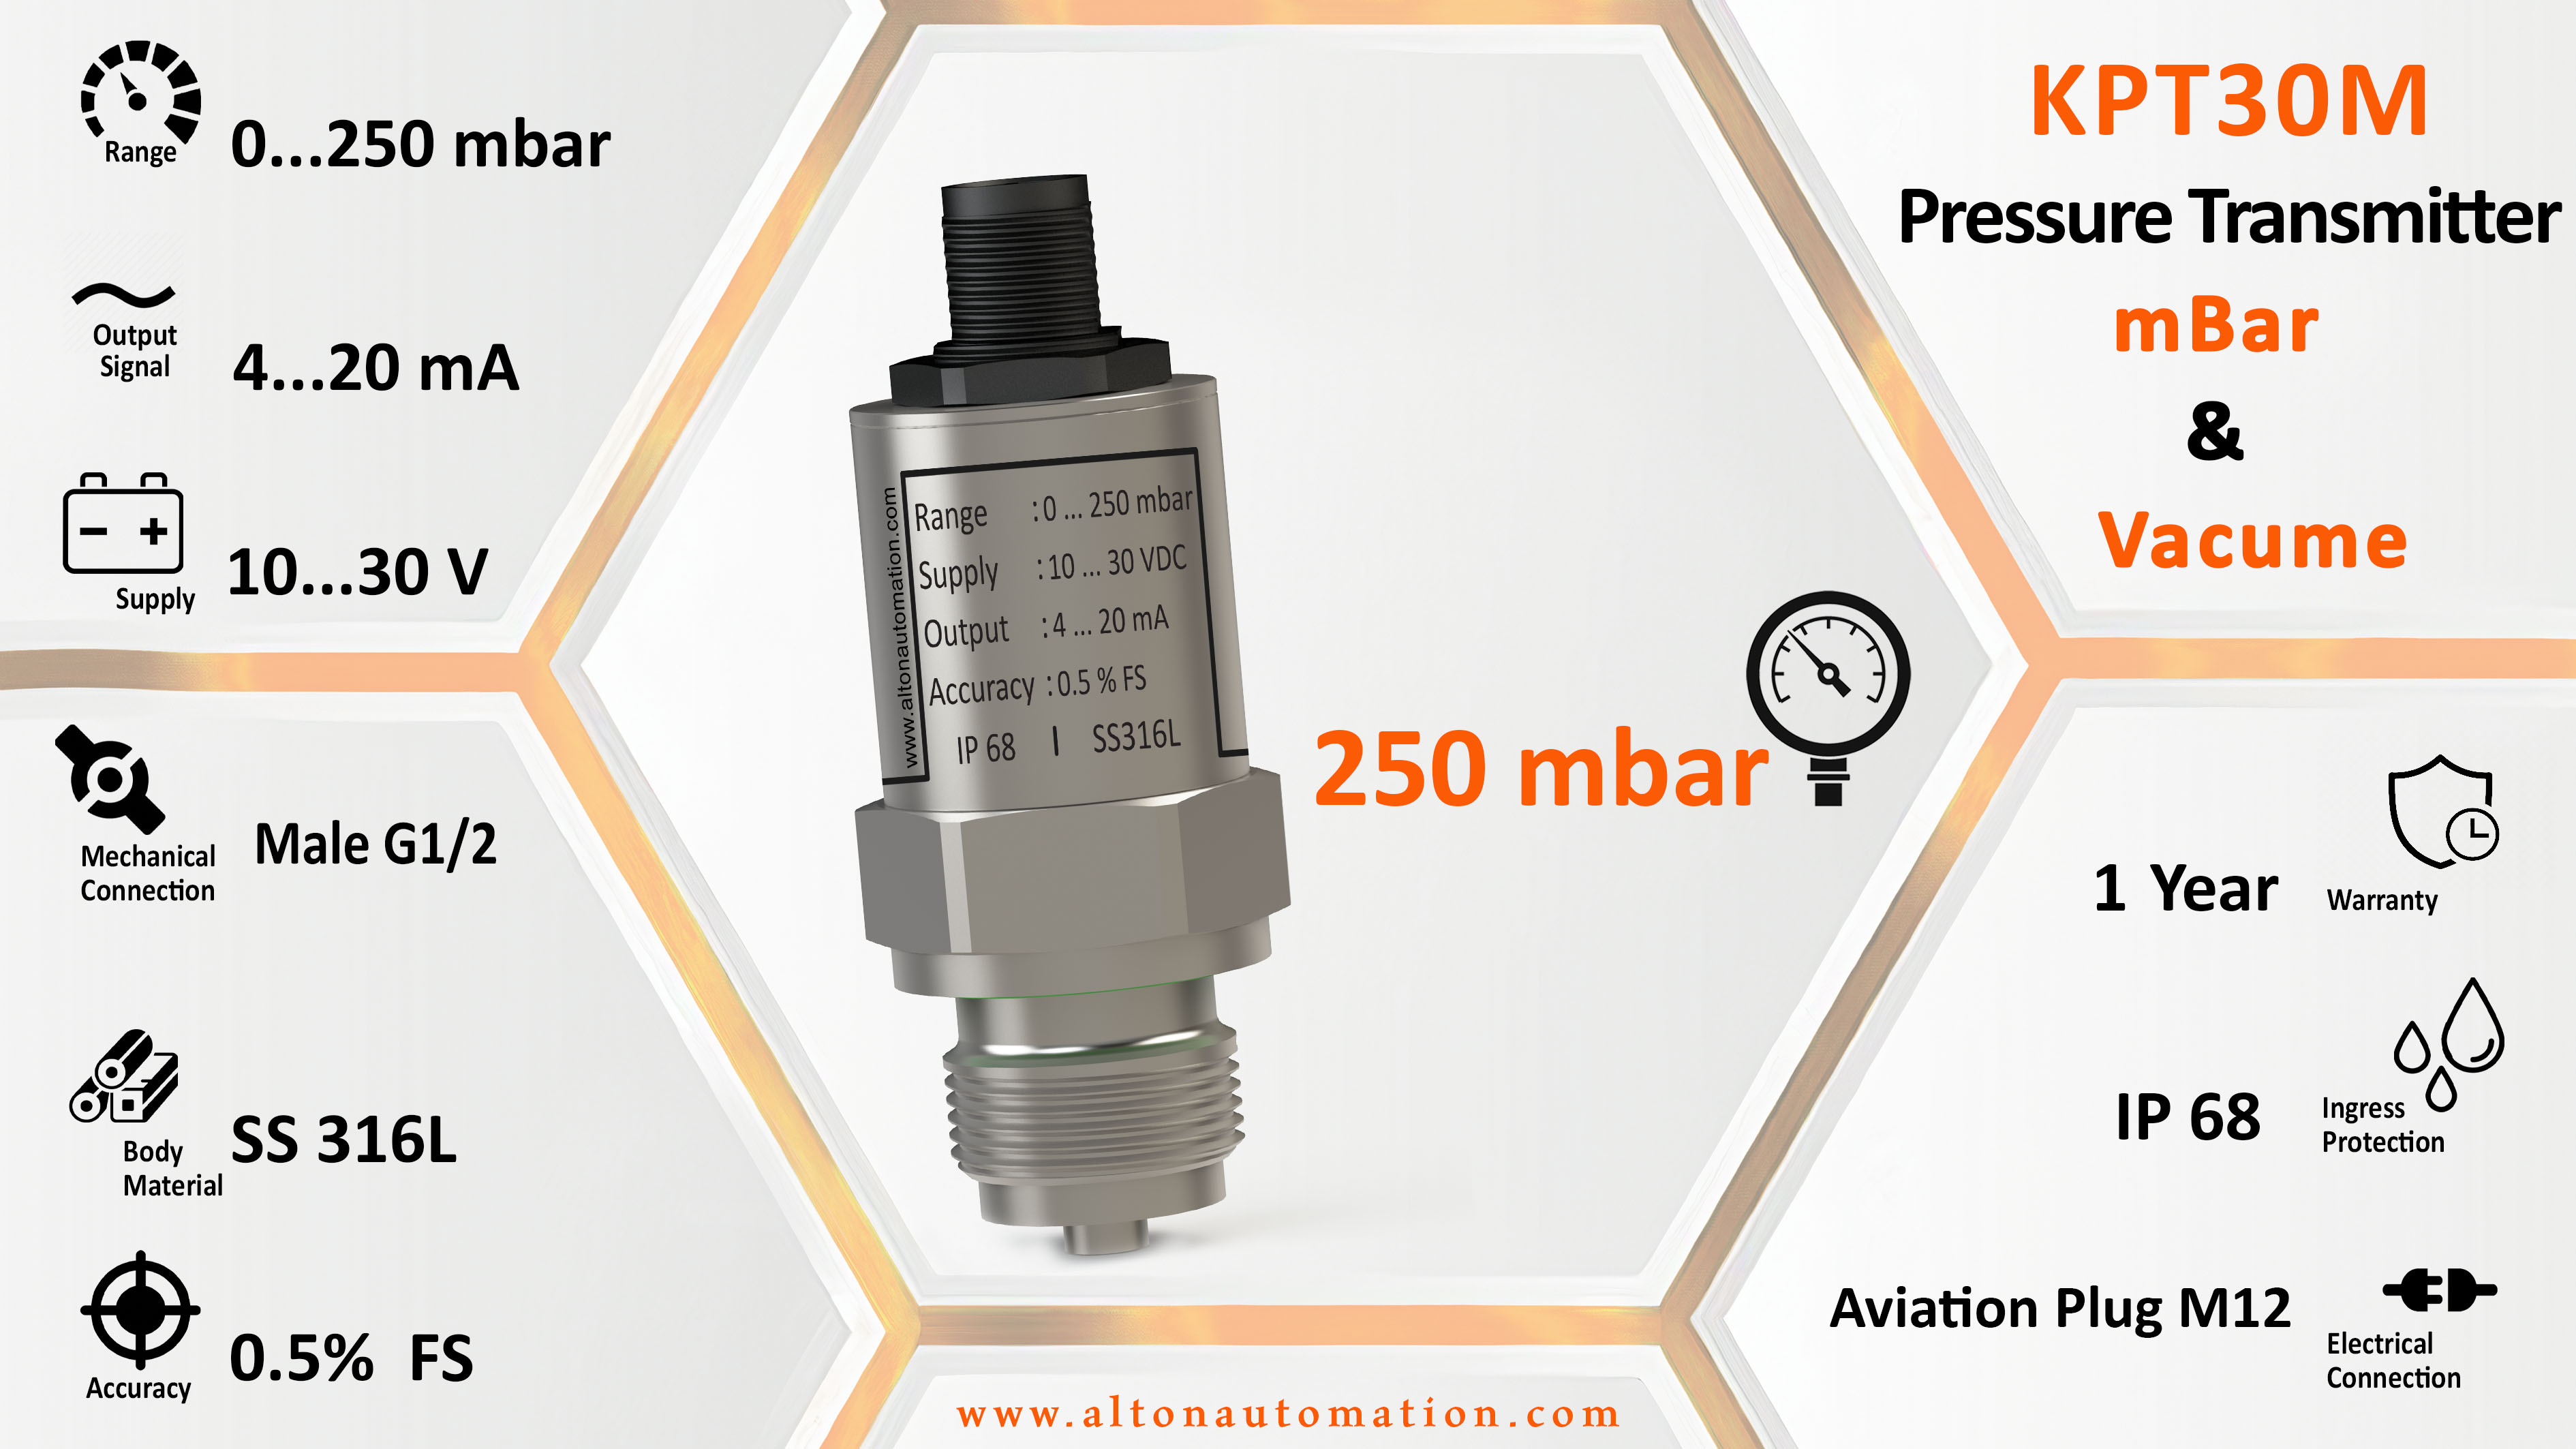 Pressure Transmitter for mbar and vacume_KPT30M-.25-C1-MG2_image_2